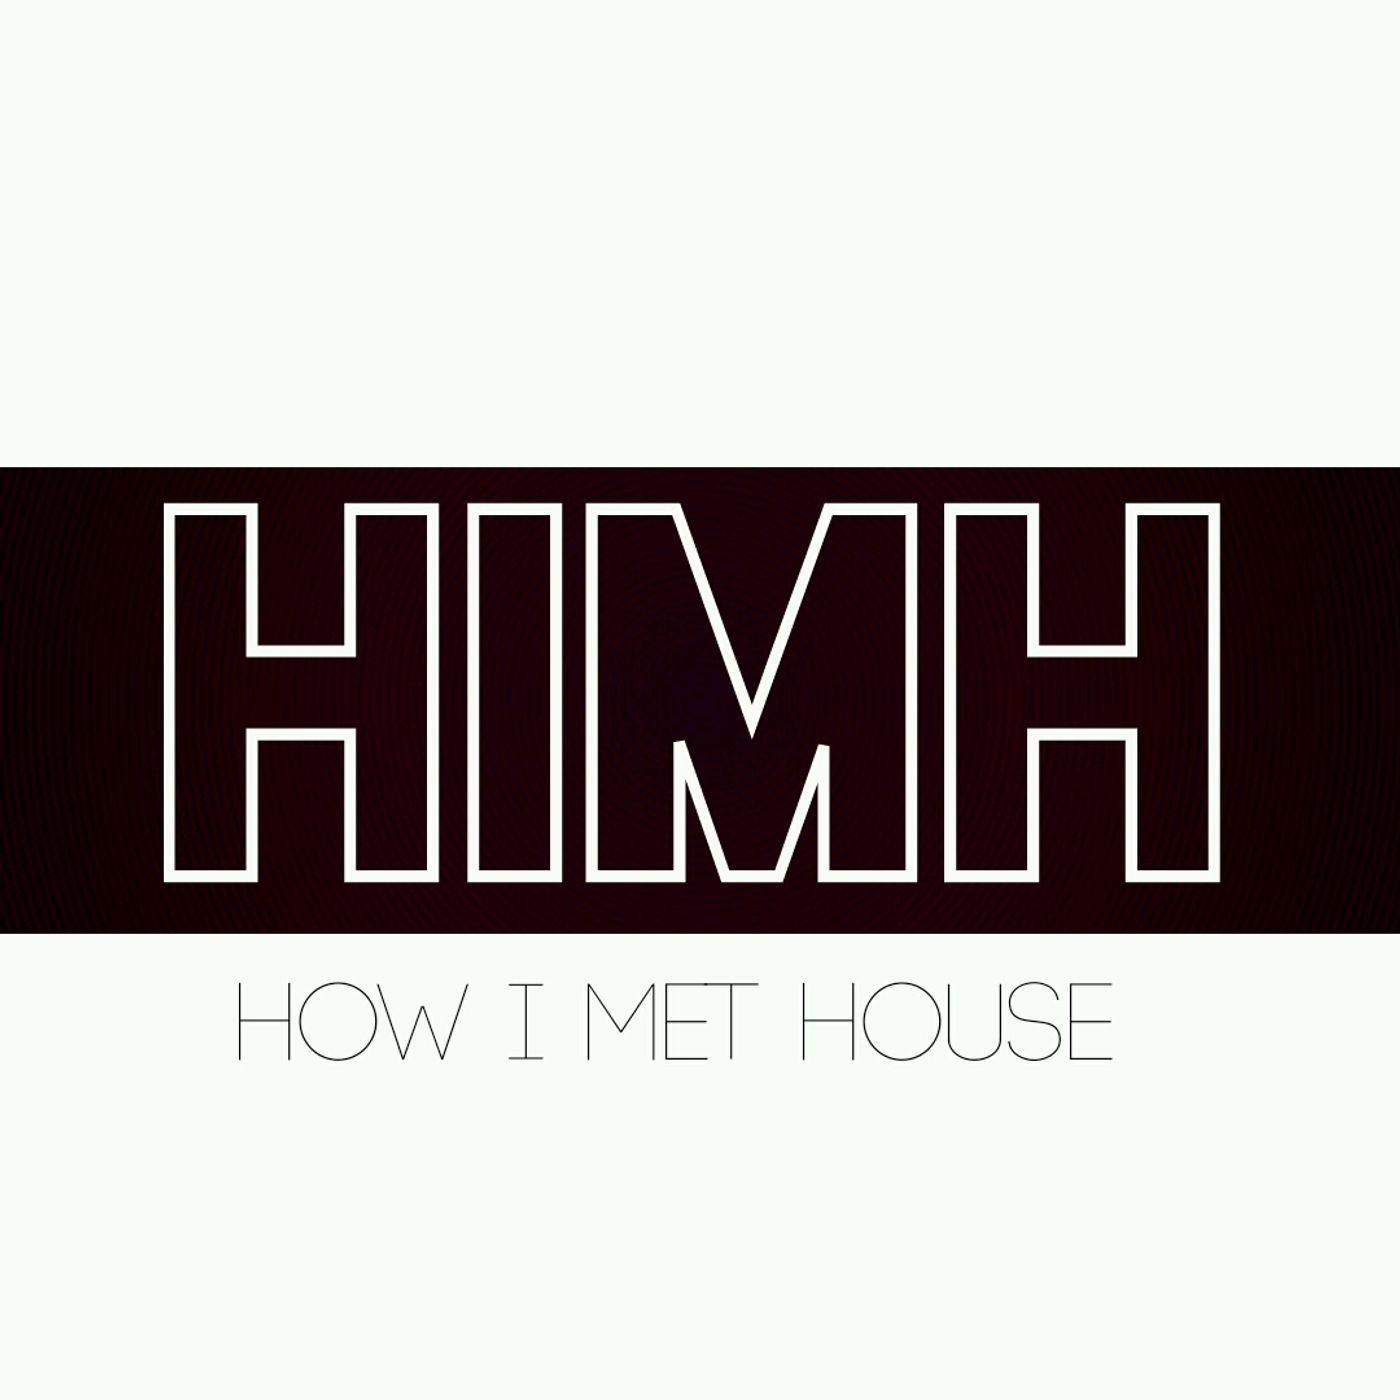 hIMh (How I Met House)